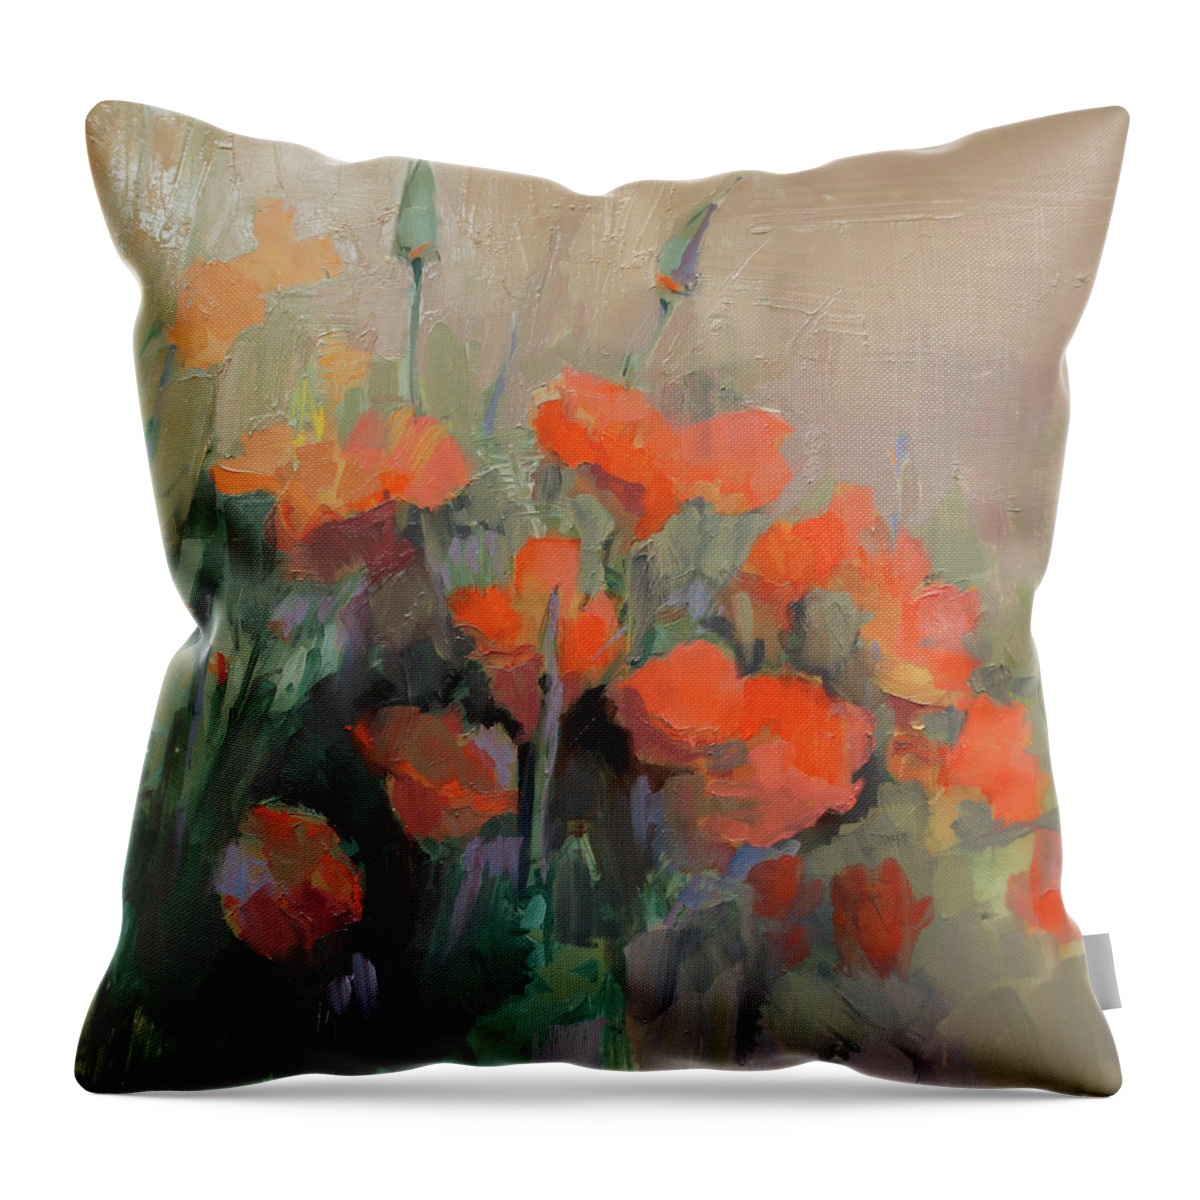 Floral Throw Pillow featuring the painting Orange Poppies by Cathy Locke